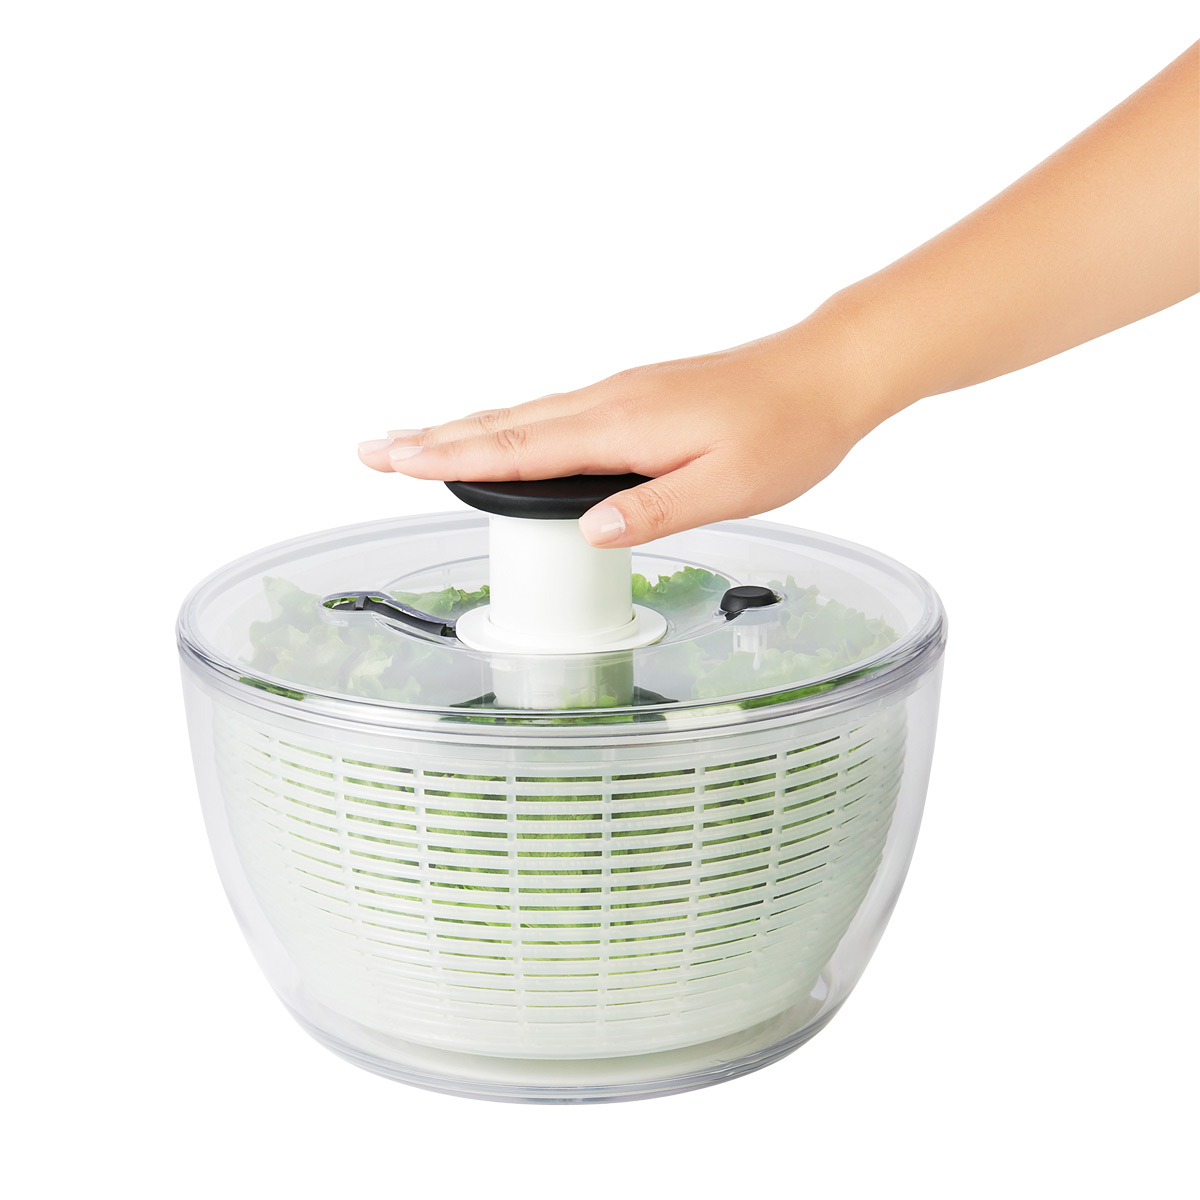 How to Use a Salad Spinner